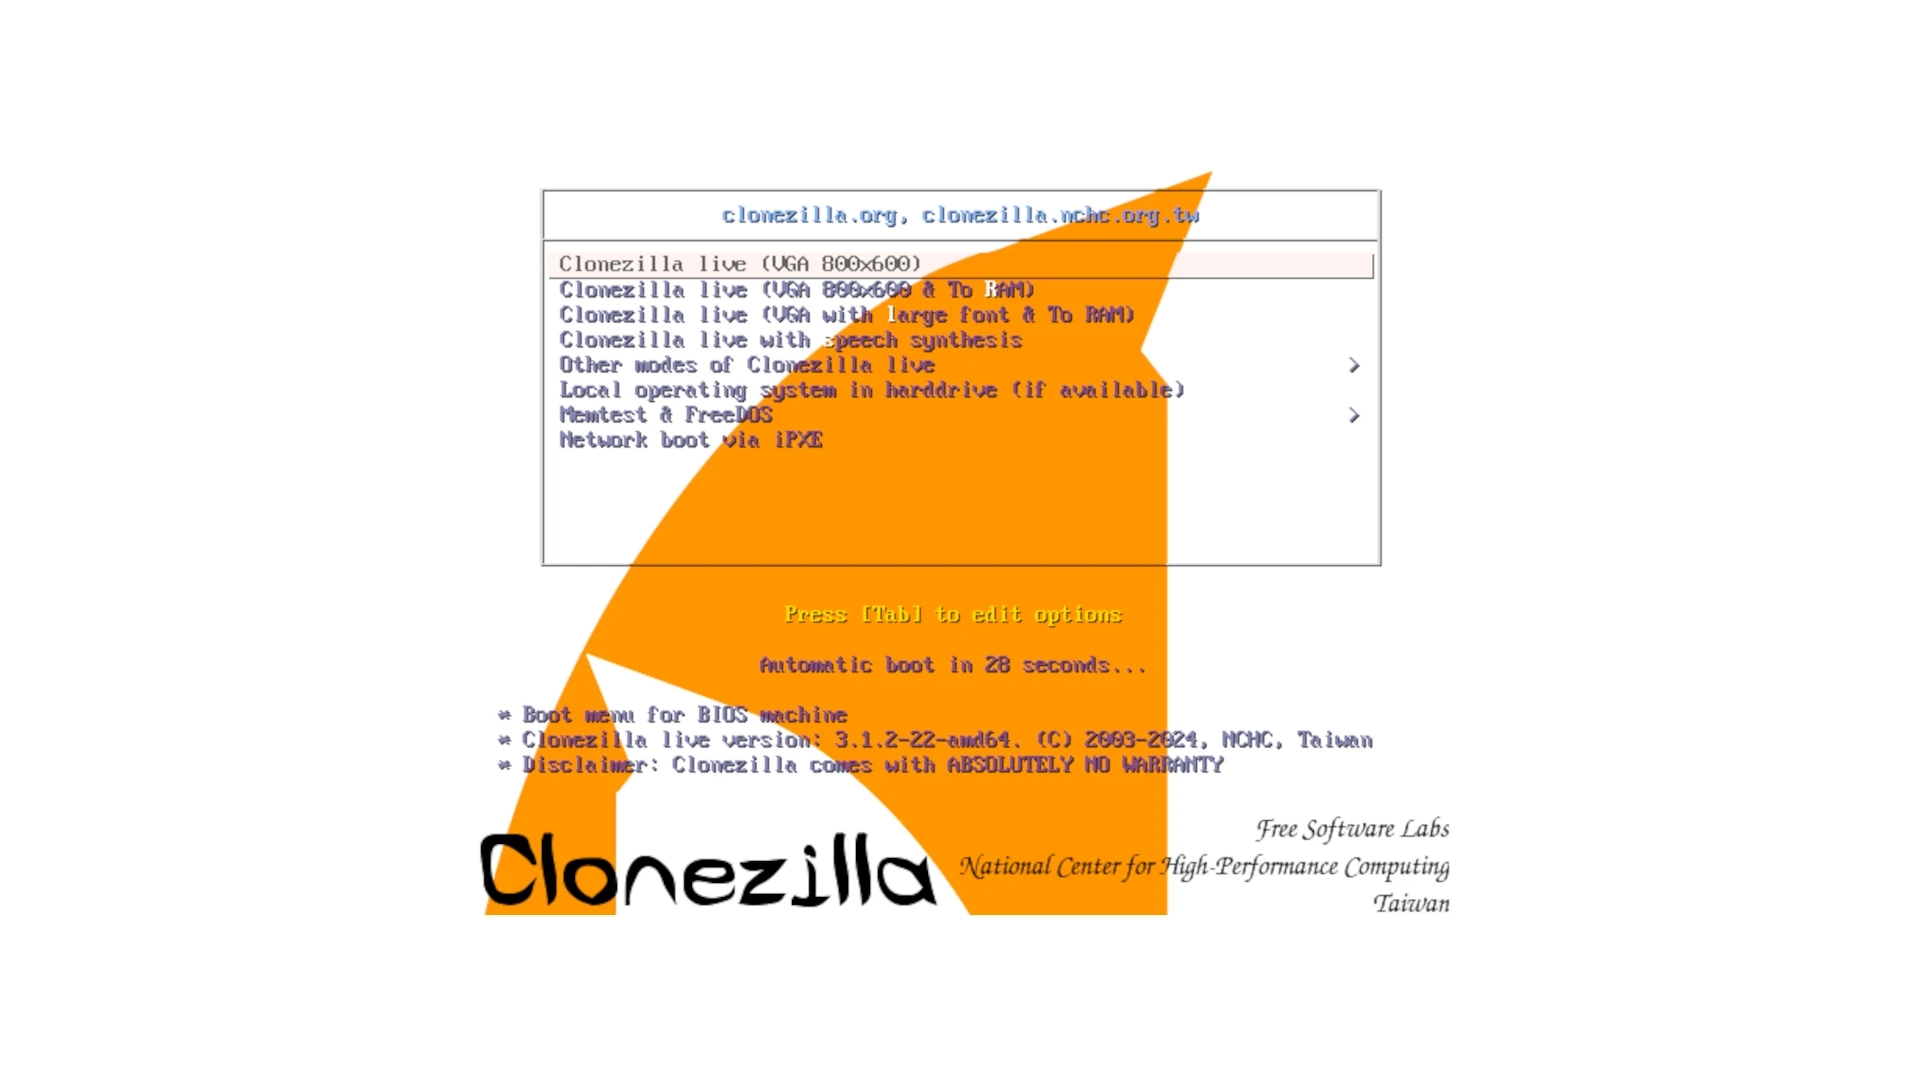 Clonezilla Live Safeguarded Against XZ Backdoor: Now Running on Linux 6.7